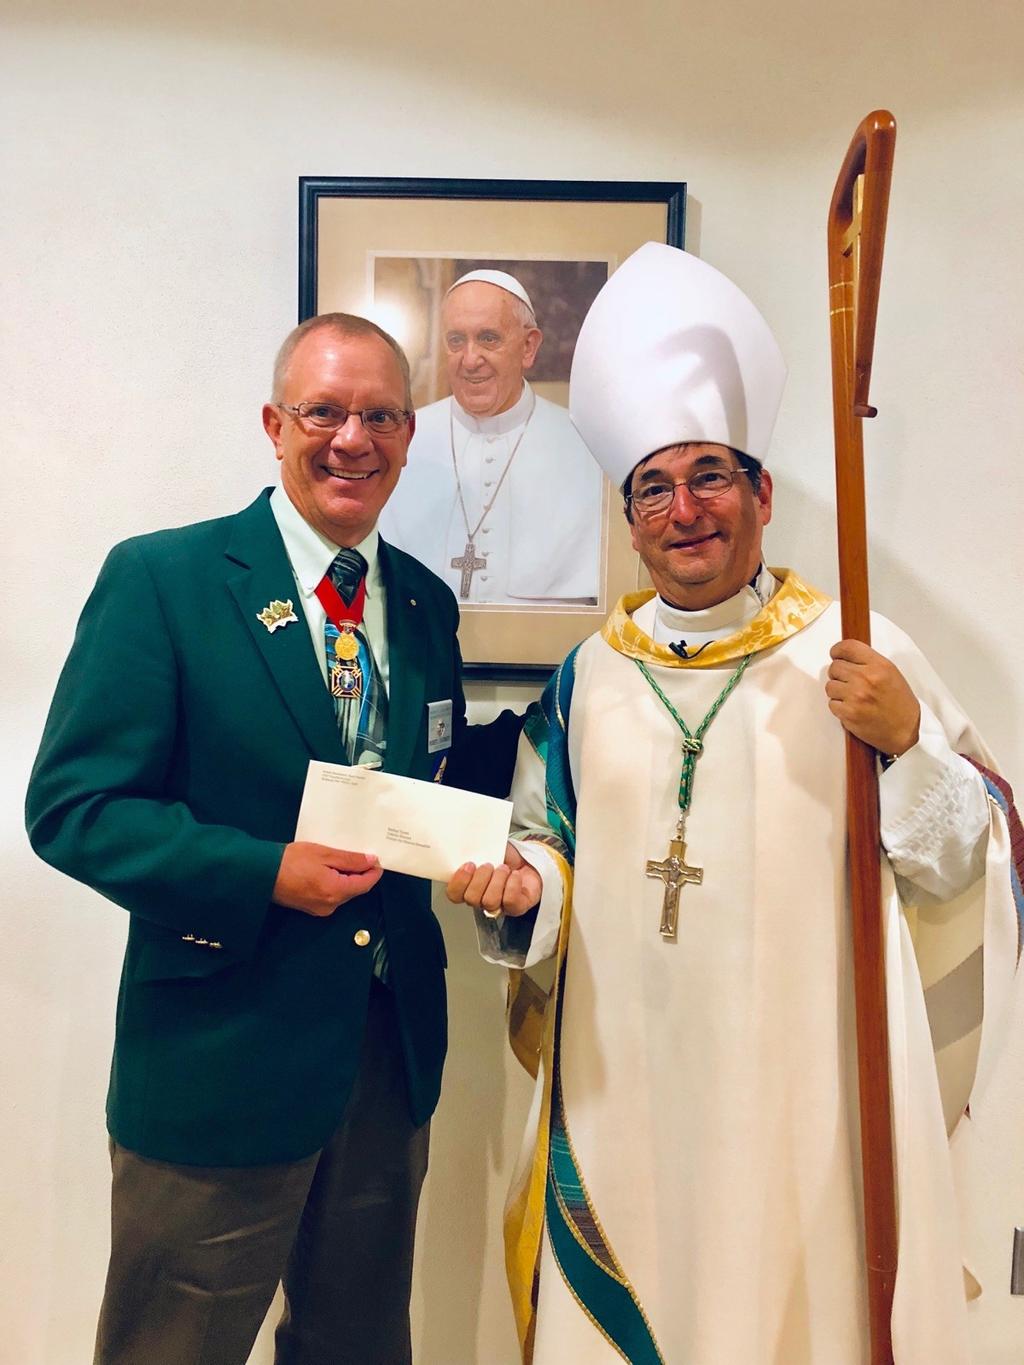 I received the Pennies For Heaven checks from the State Treasurer and I started to make plans with the Bishops' Offices to do the presentations.